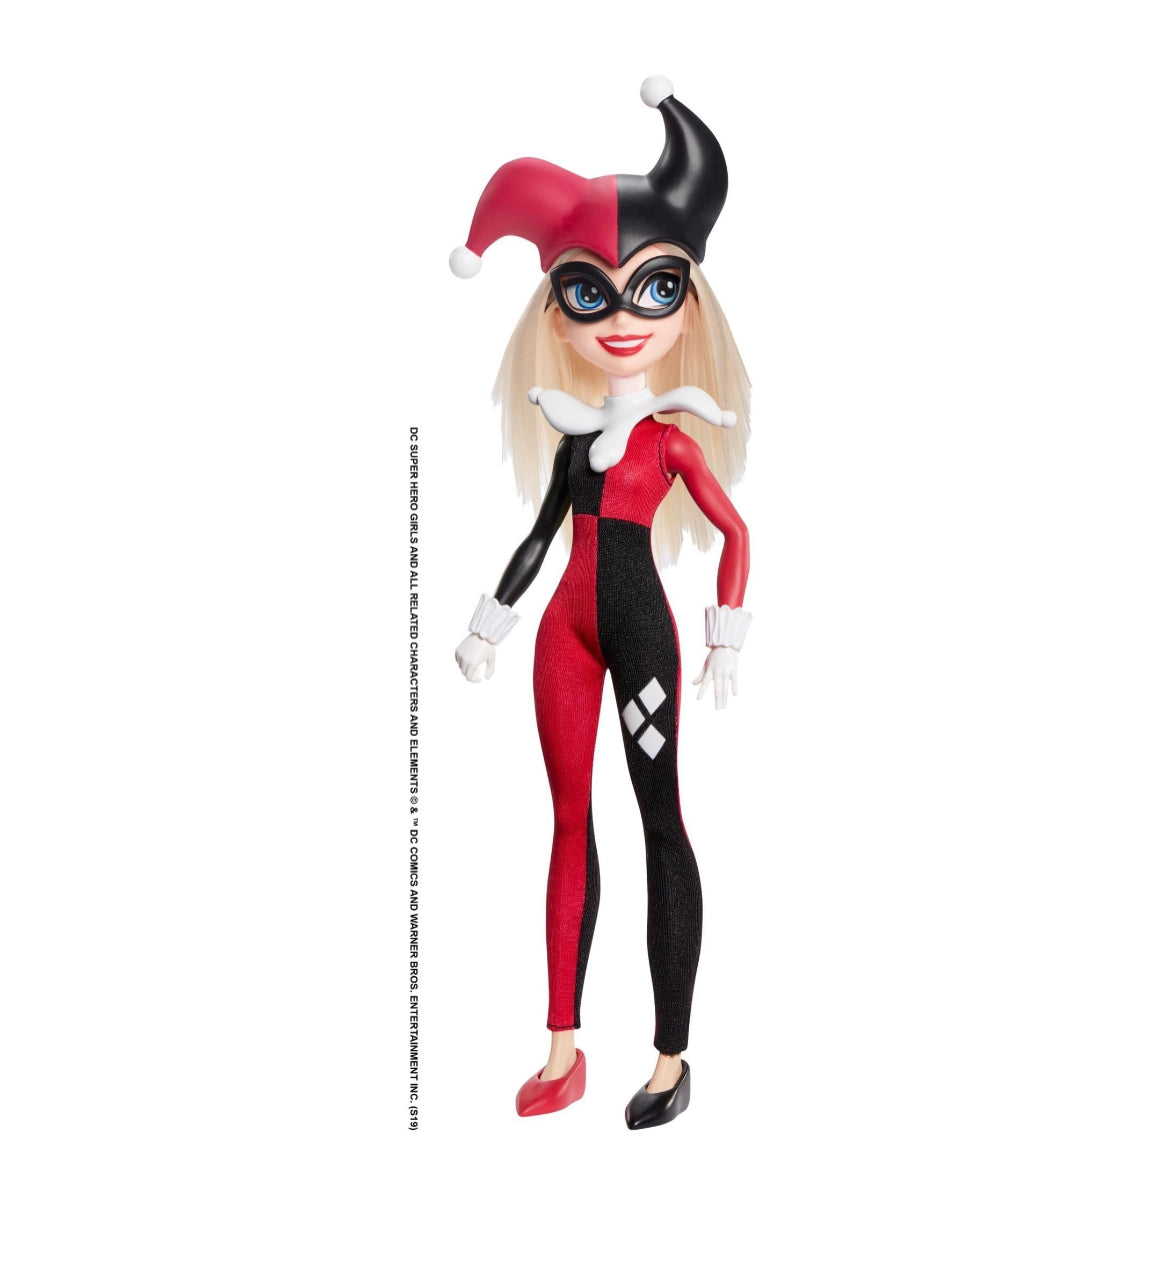 DC Super Hero Girls Harley Quinn 11.5” Action Doll With Removable Accessories